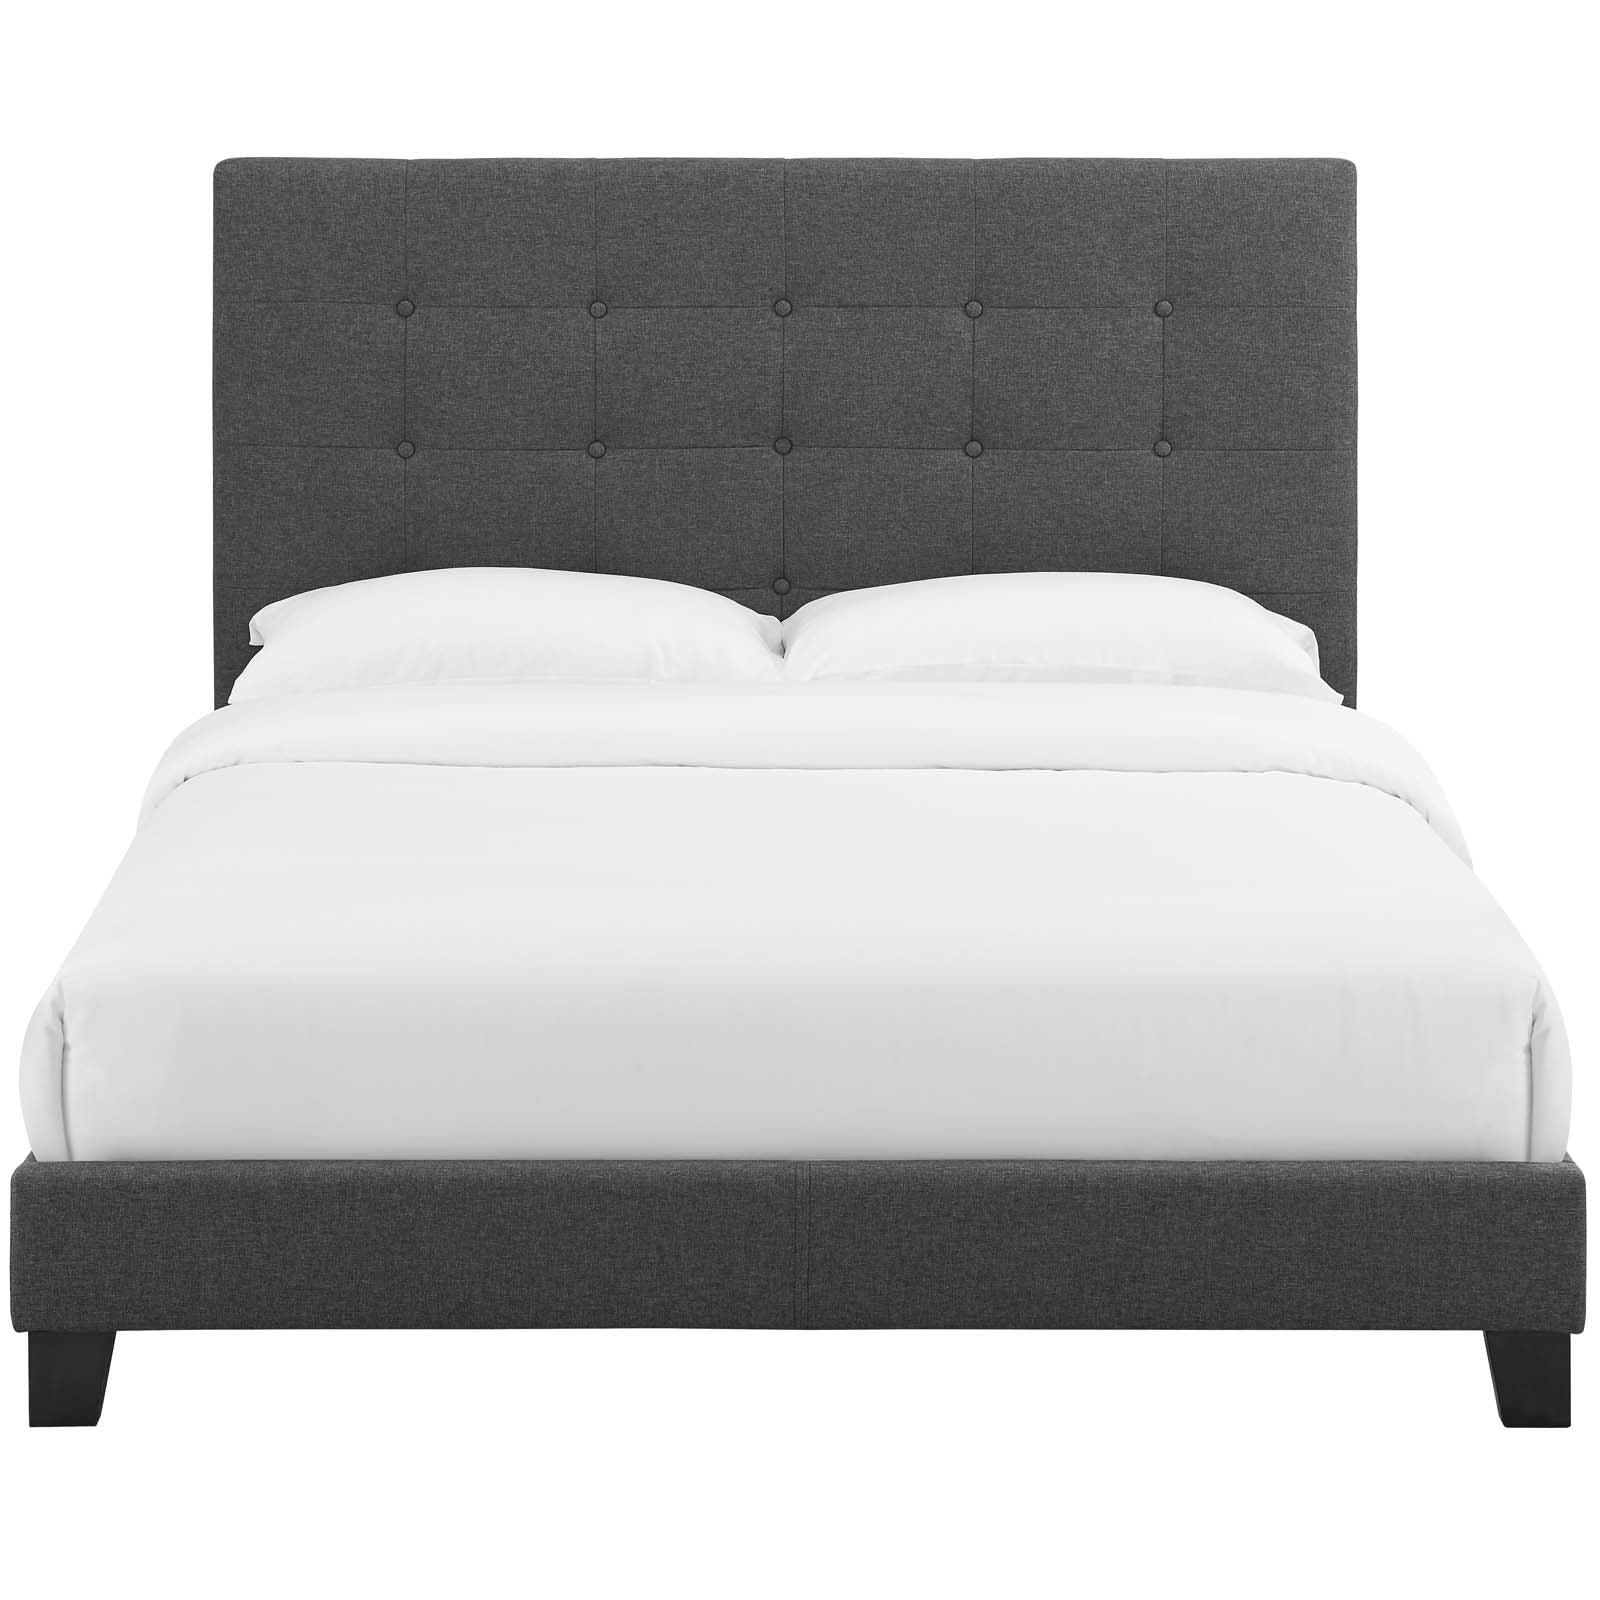 Modway Beds - Melanie Twin Tufted Button Upholstered Fabric Platform Bed Gray